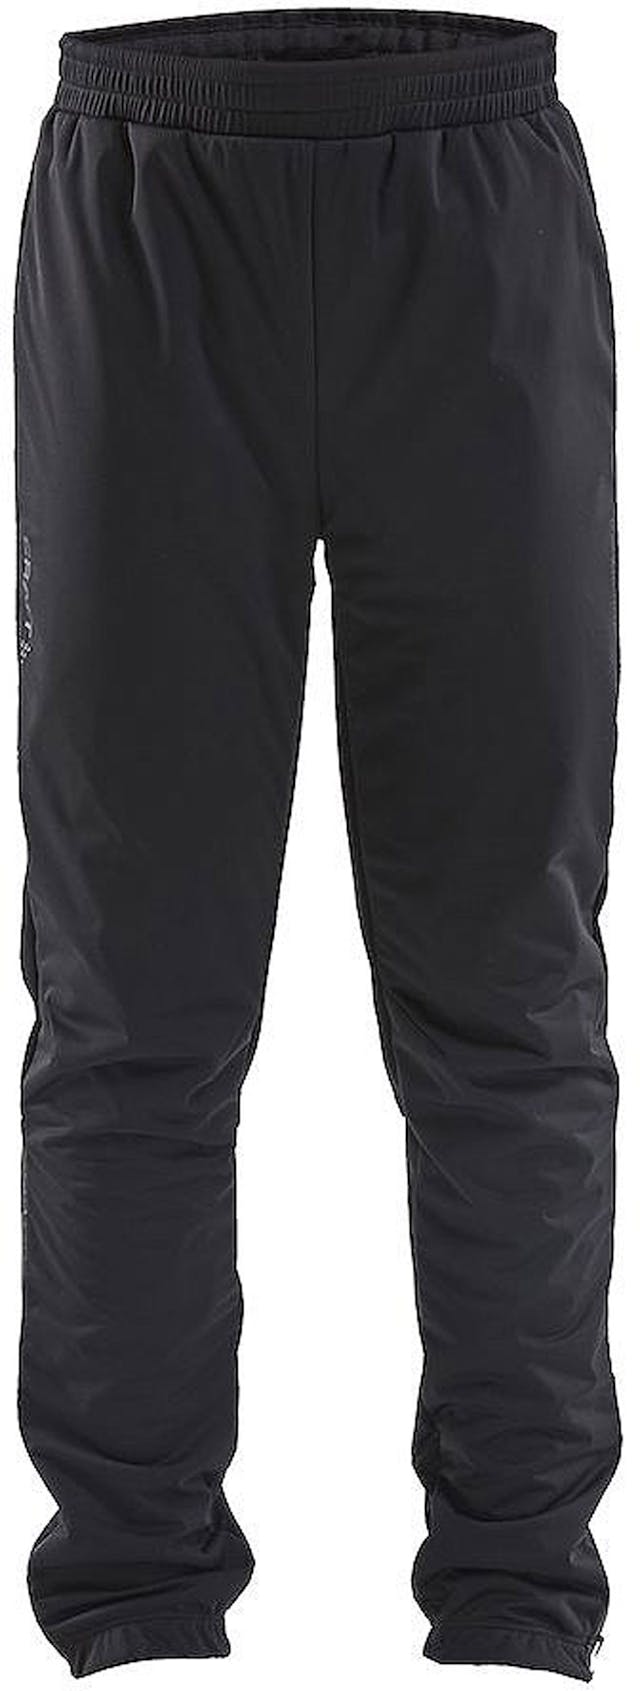 Product image for Core Warm XC Pants - Youth